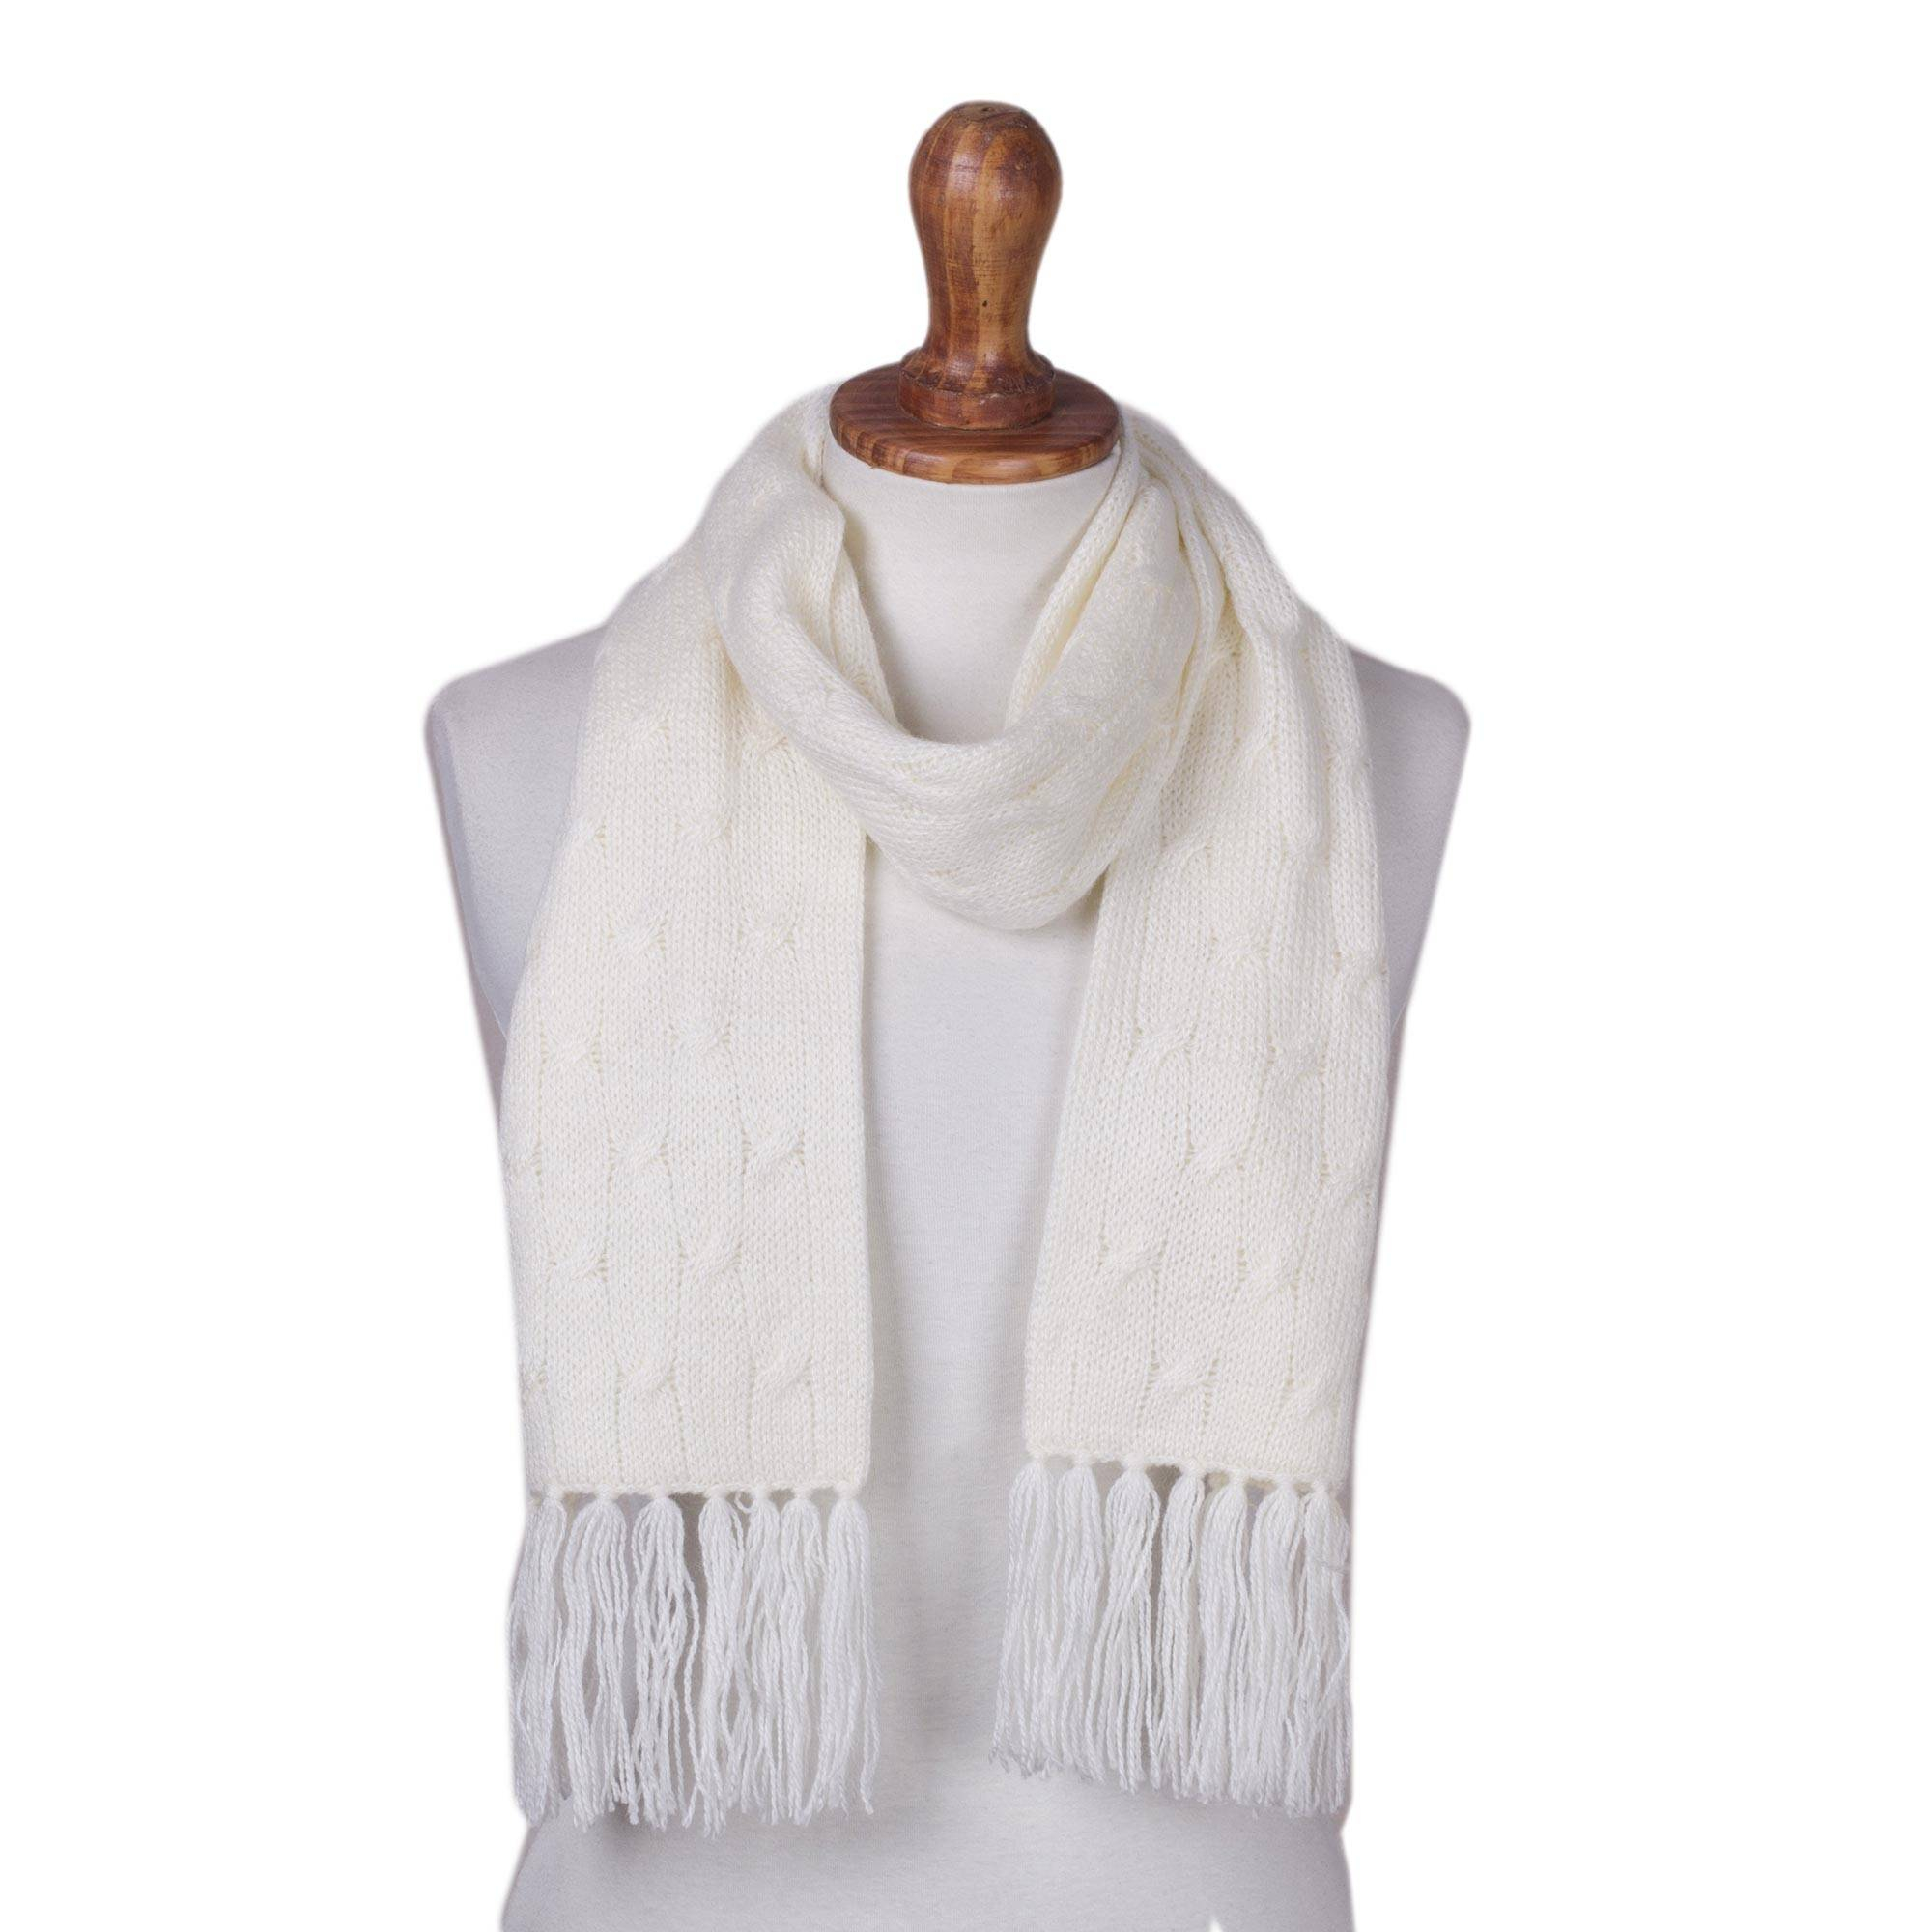 Cable Knitted Scarf Pattern White Unisex Acrylic Cable Knit Scarf From Peru Soft Winter White